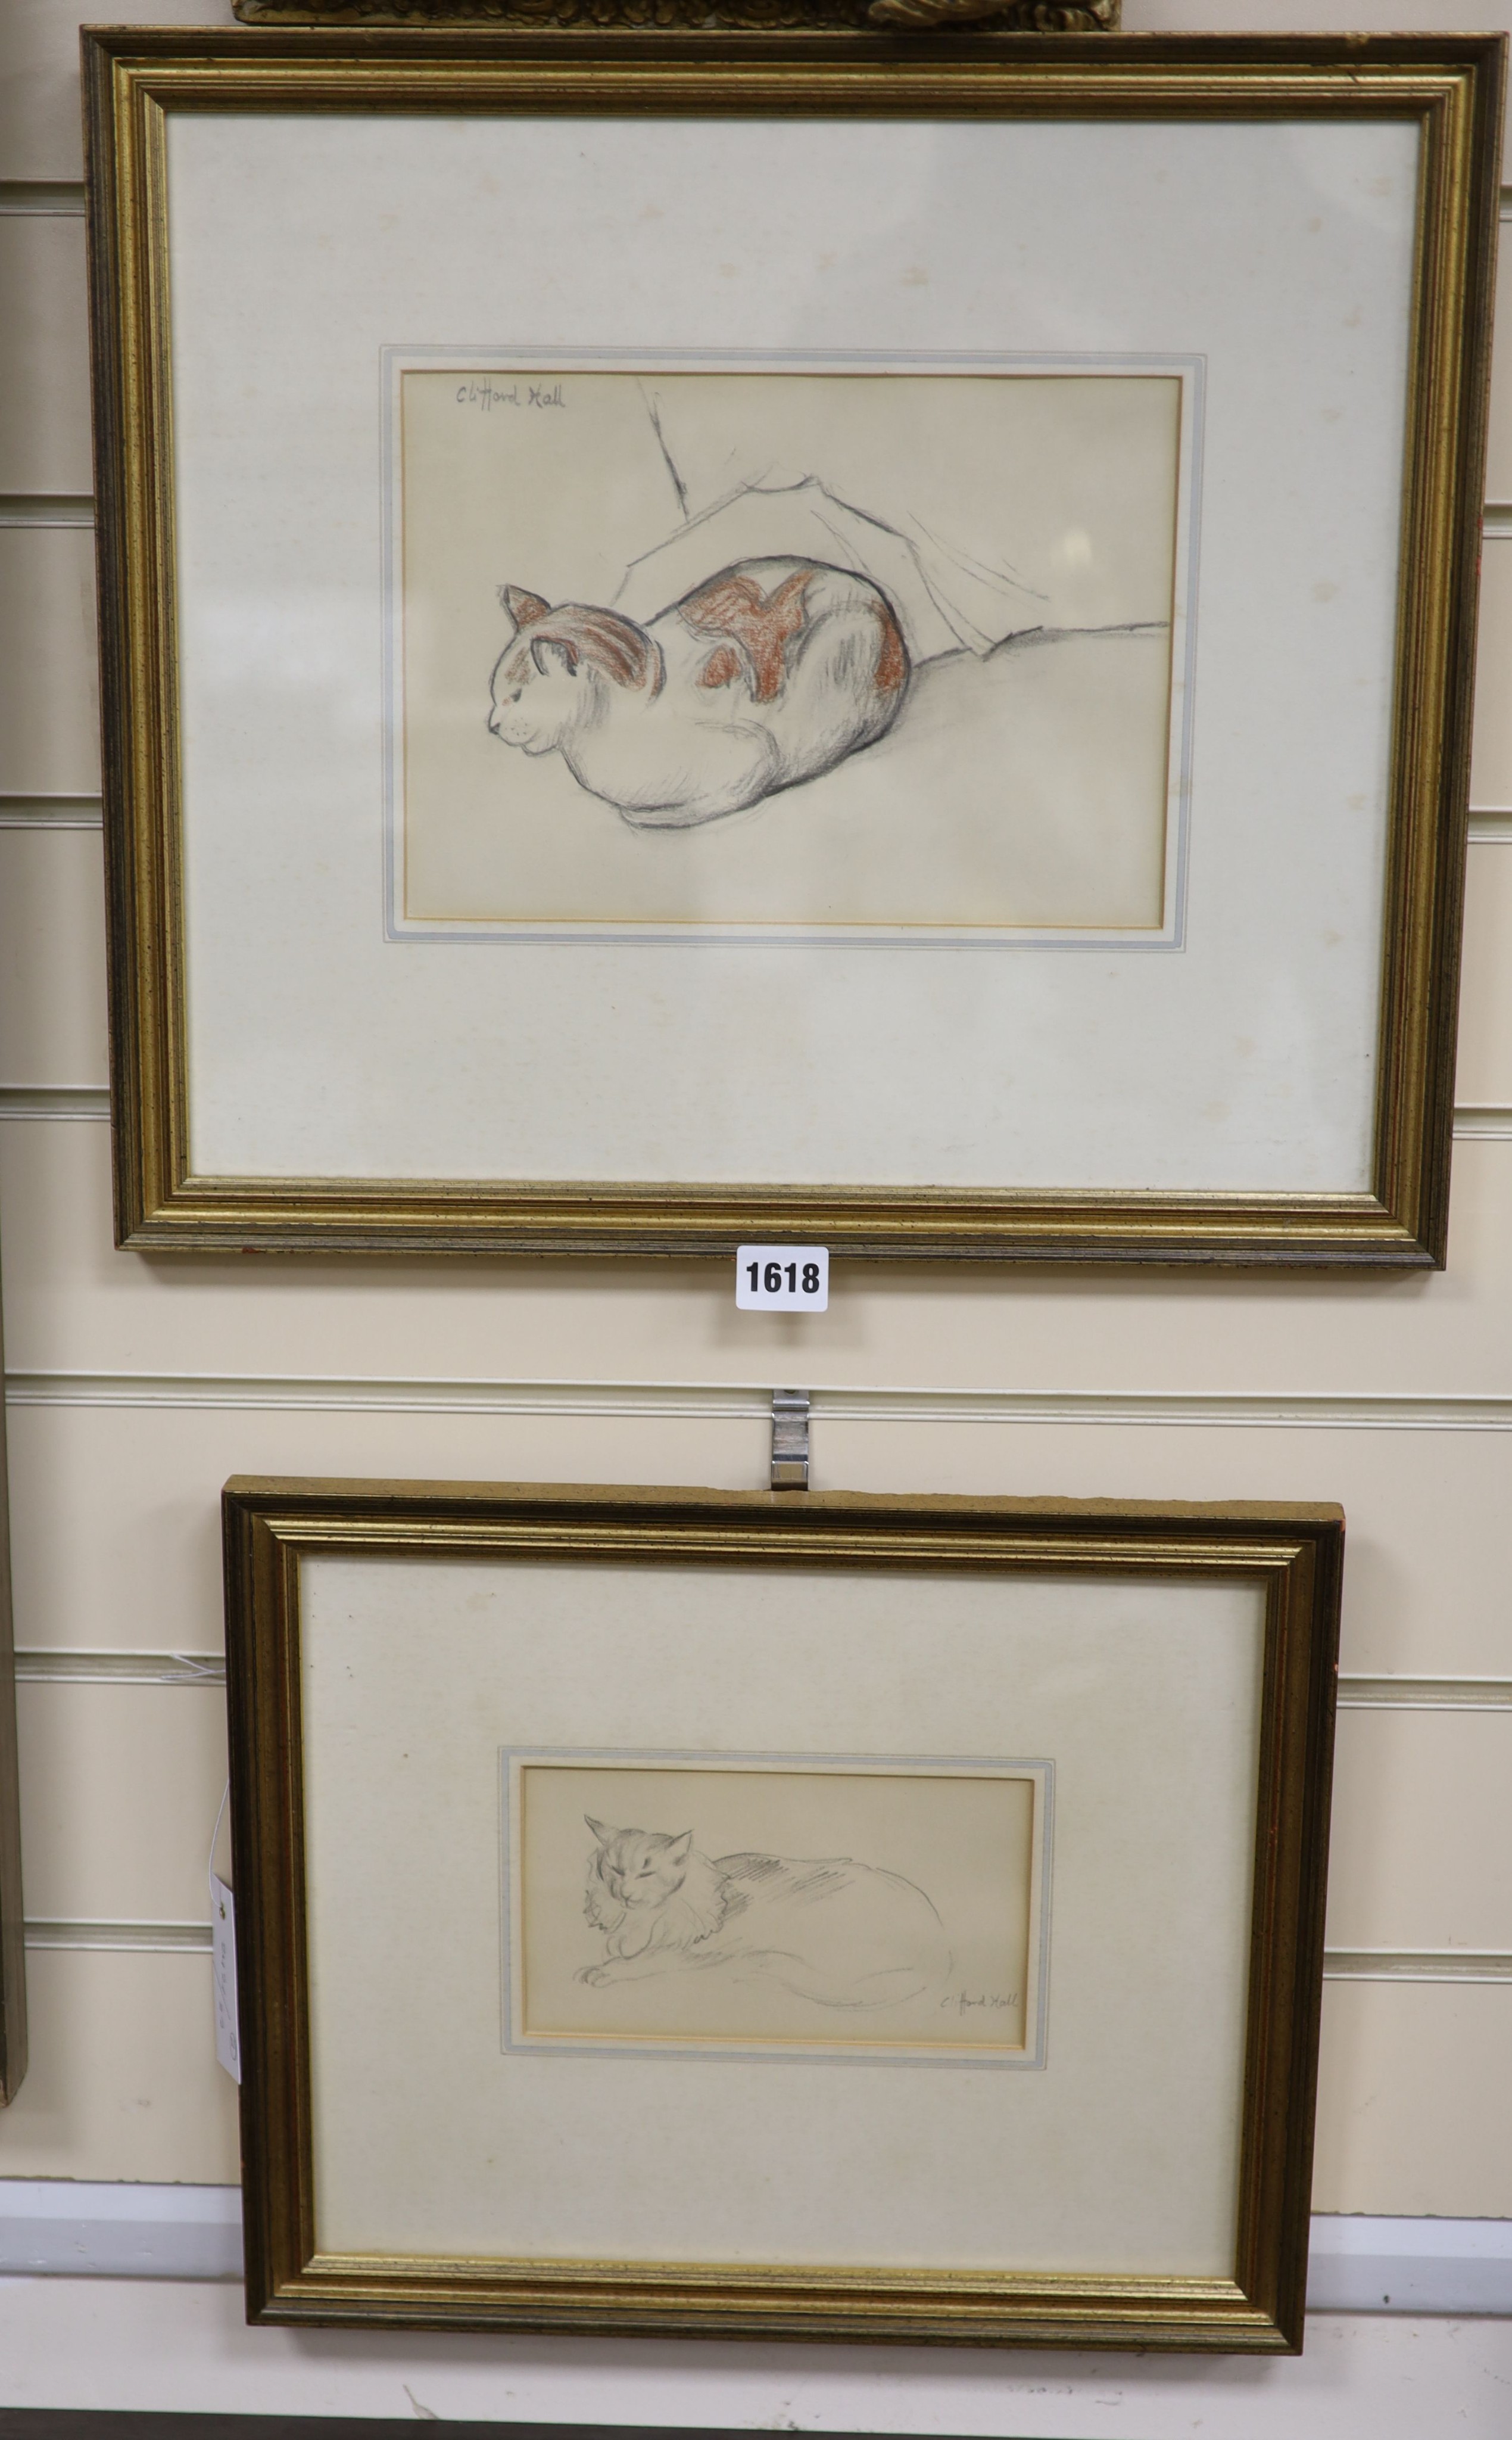 Clifford Hall (1904-1973), two pencil and chalk drawings, Studies of cats, signed, 18 x 25cm and 10 x 18cm